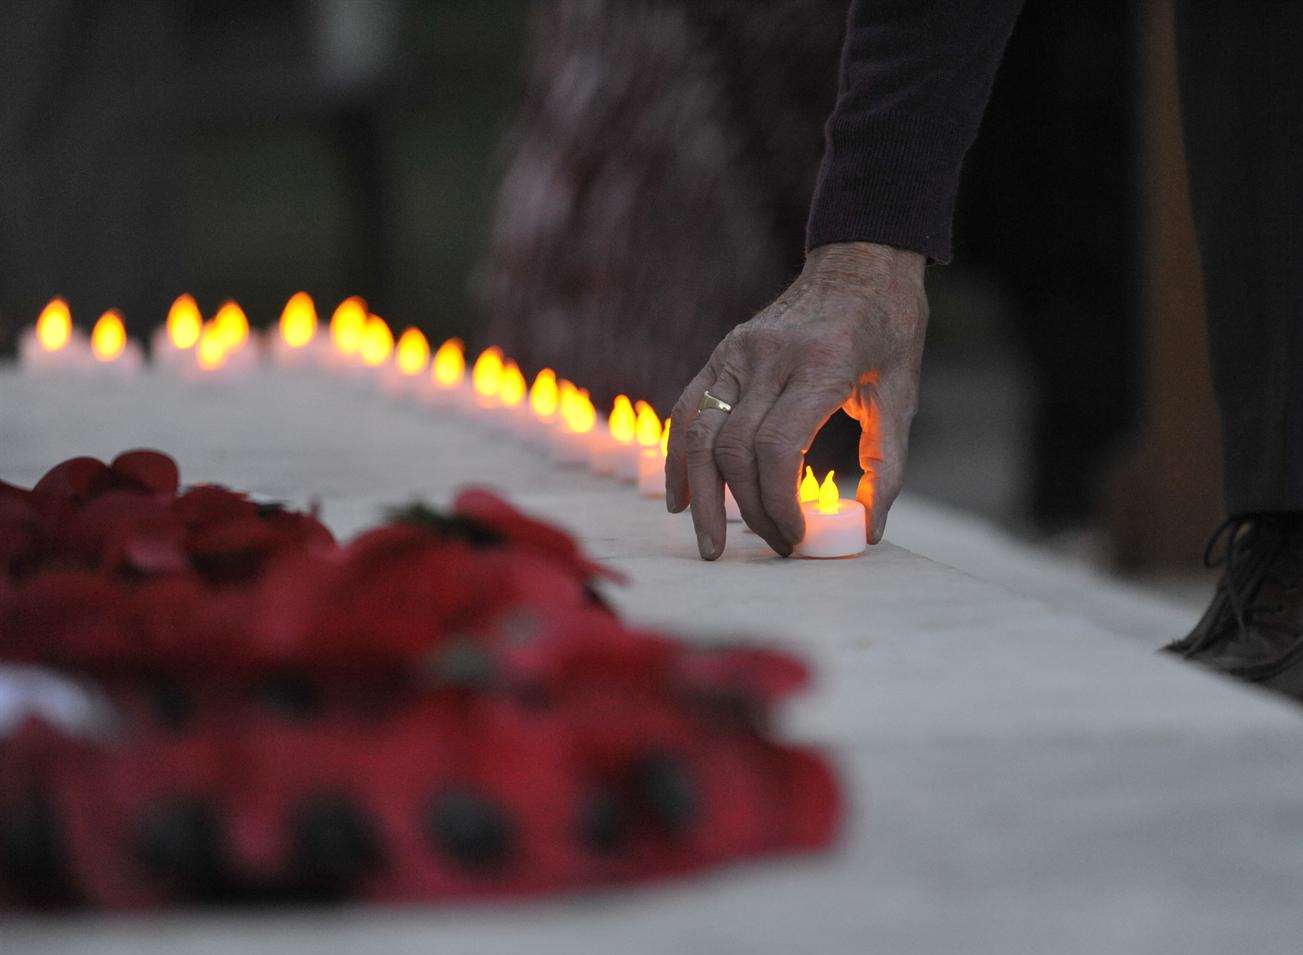 Candles were lit at the drumhead service at Brenchley Gardens in Maidstone around the war memorial.